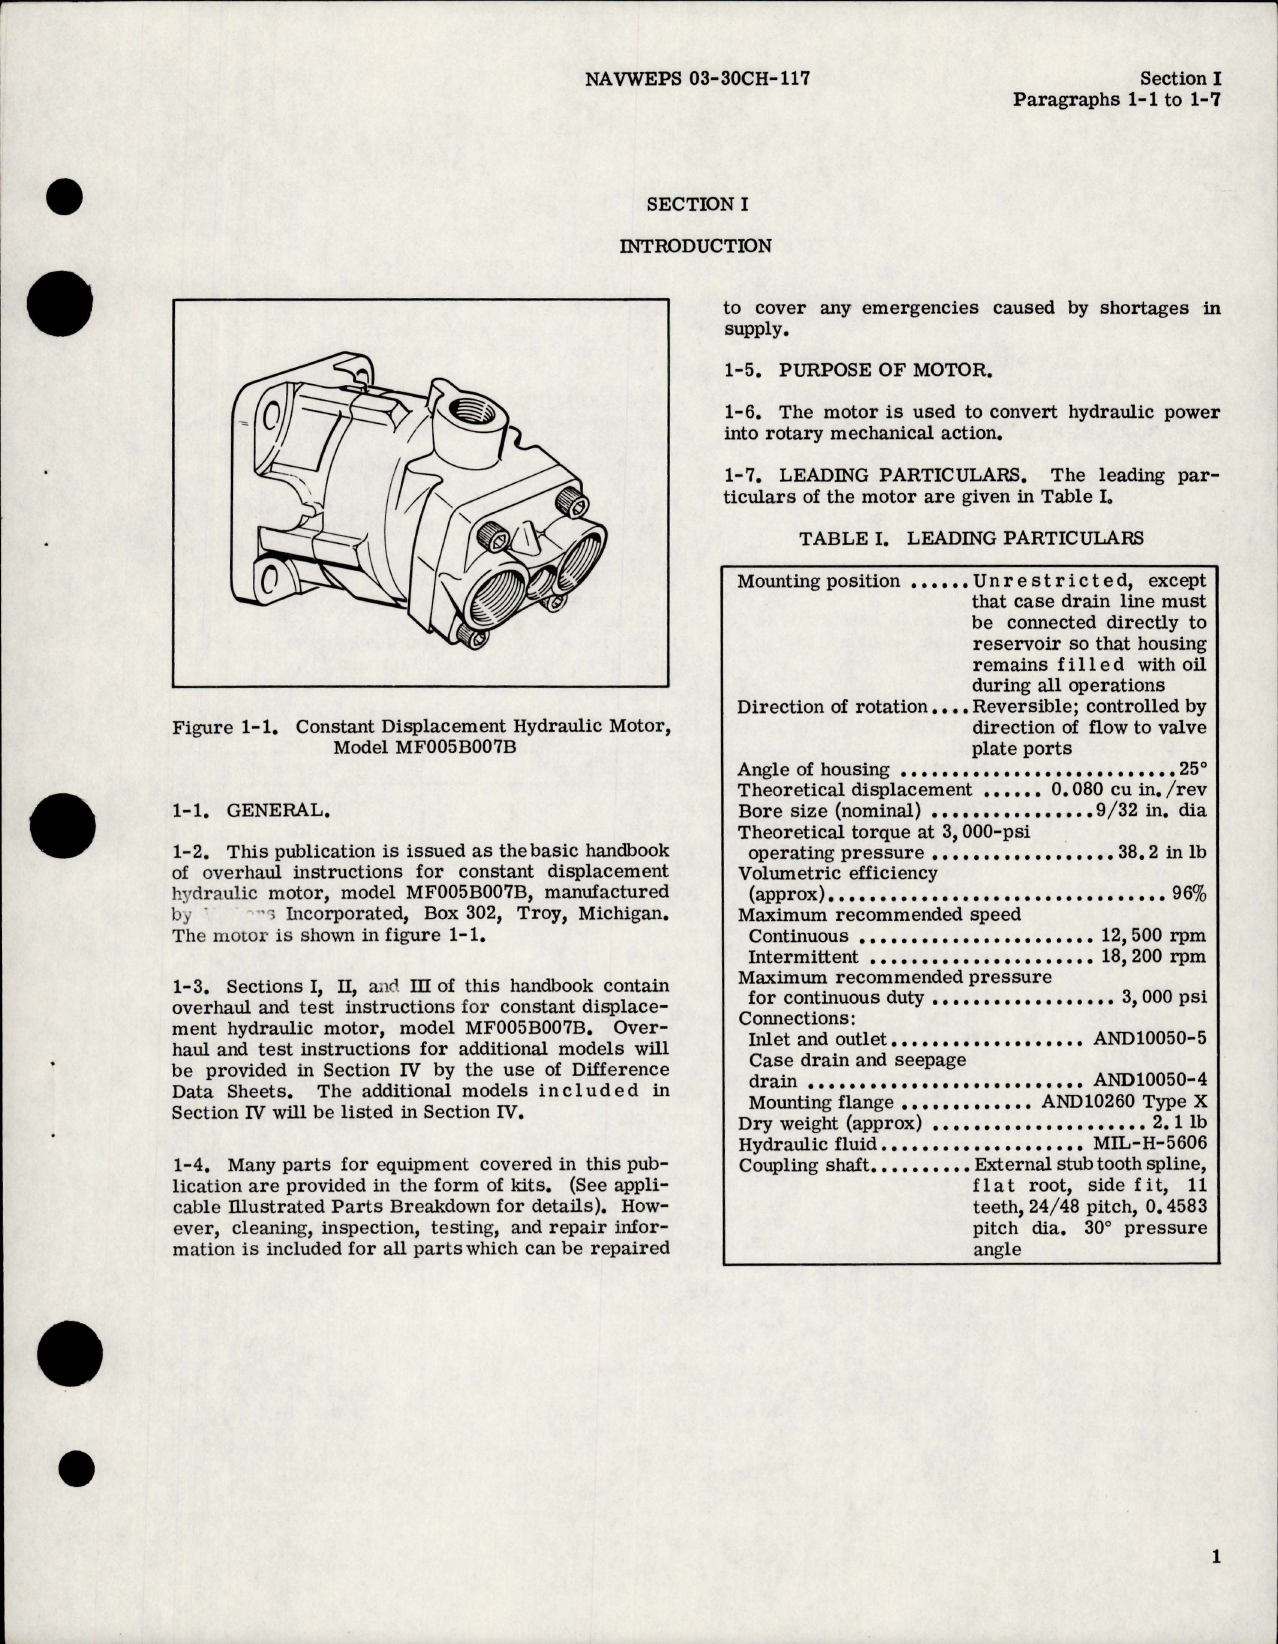 Sample page 5 from AirCorps Library document: Overhaul Instructions for Constant Displacement Hydraulic Motor - Model MF005B007B 